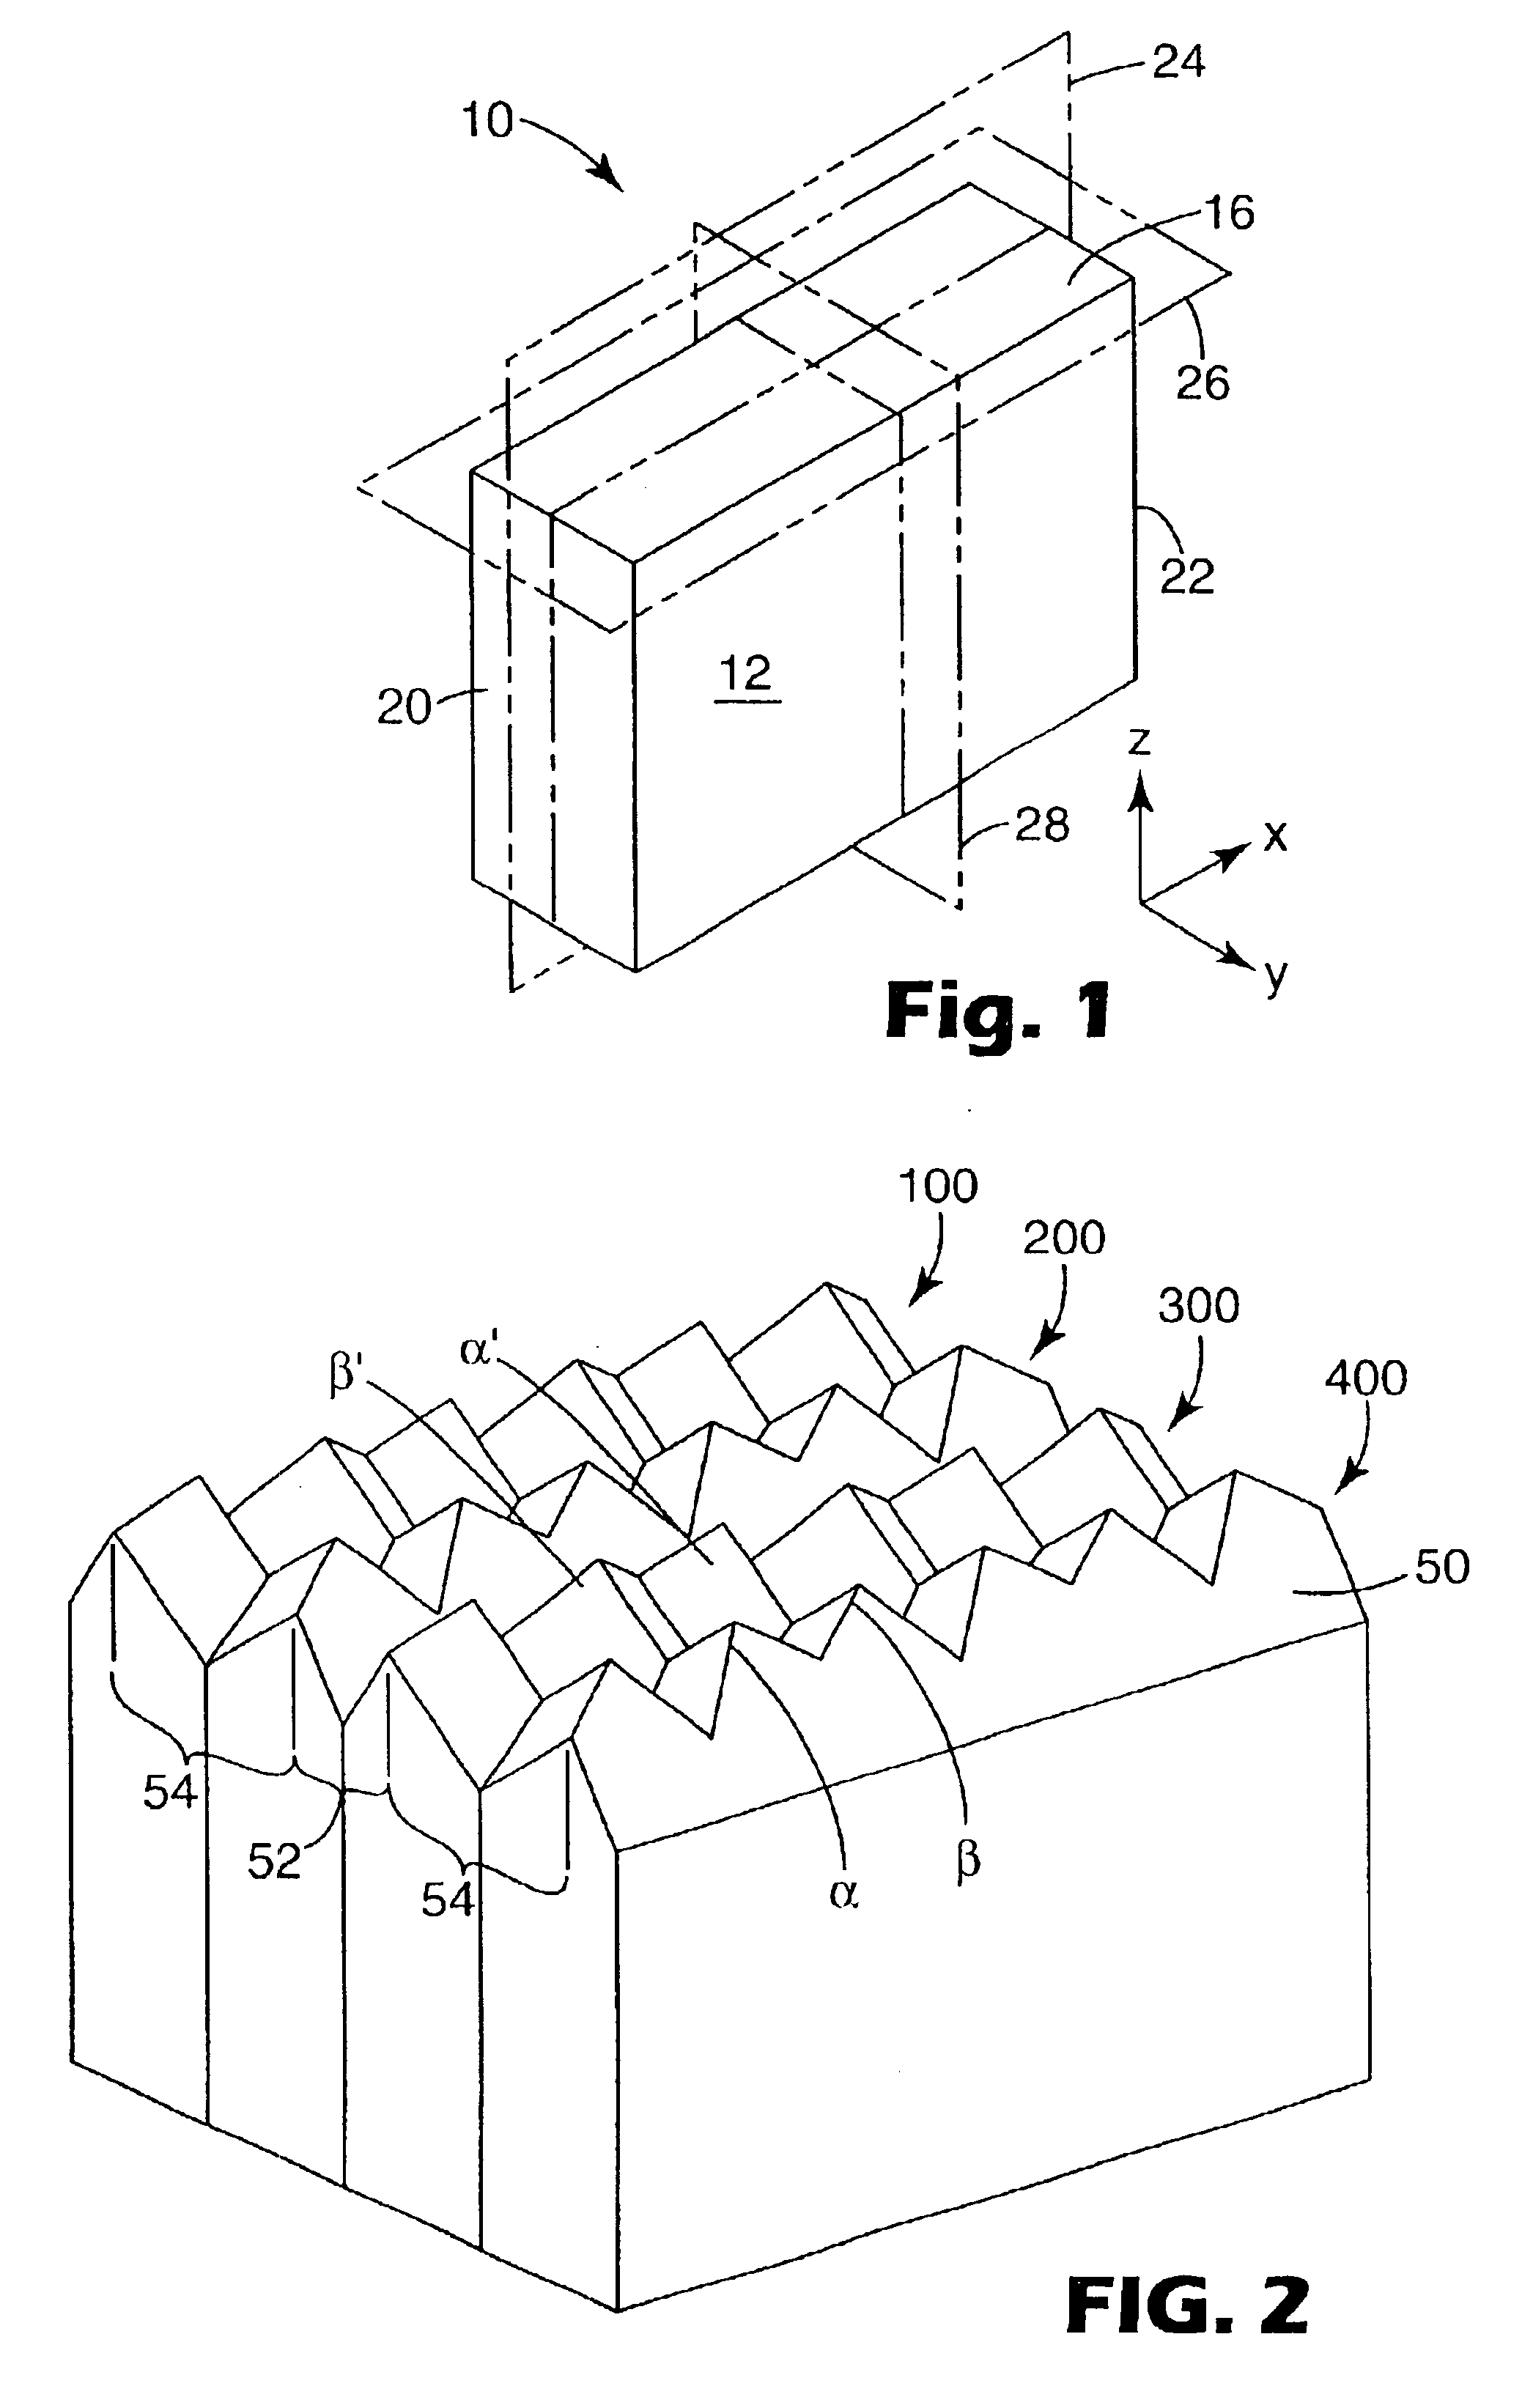 Method of making retroreflective sheeting and articles